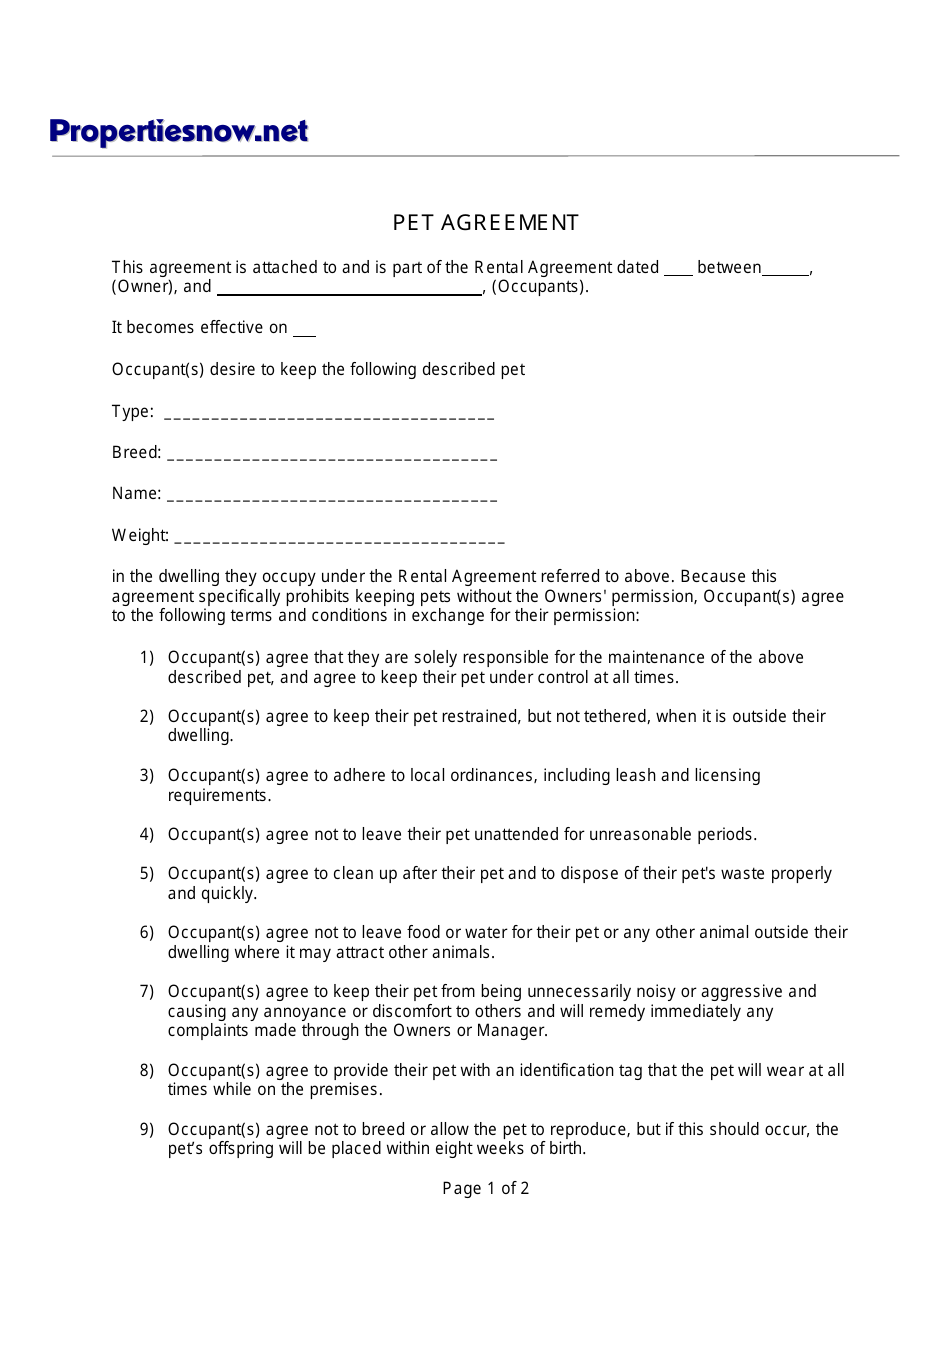 Pet Agreement Form Seventeen Points Fill Out, Sign Online and